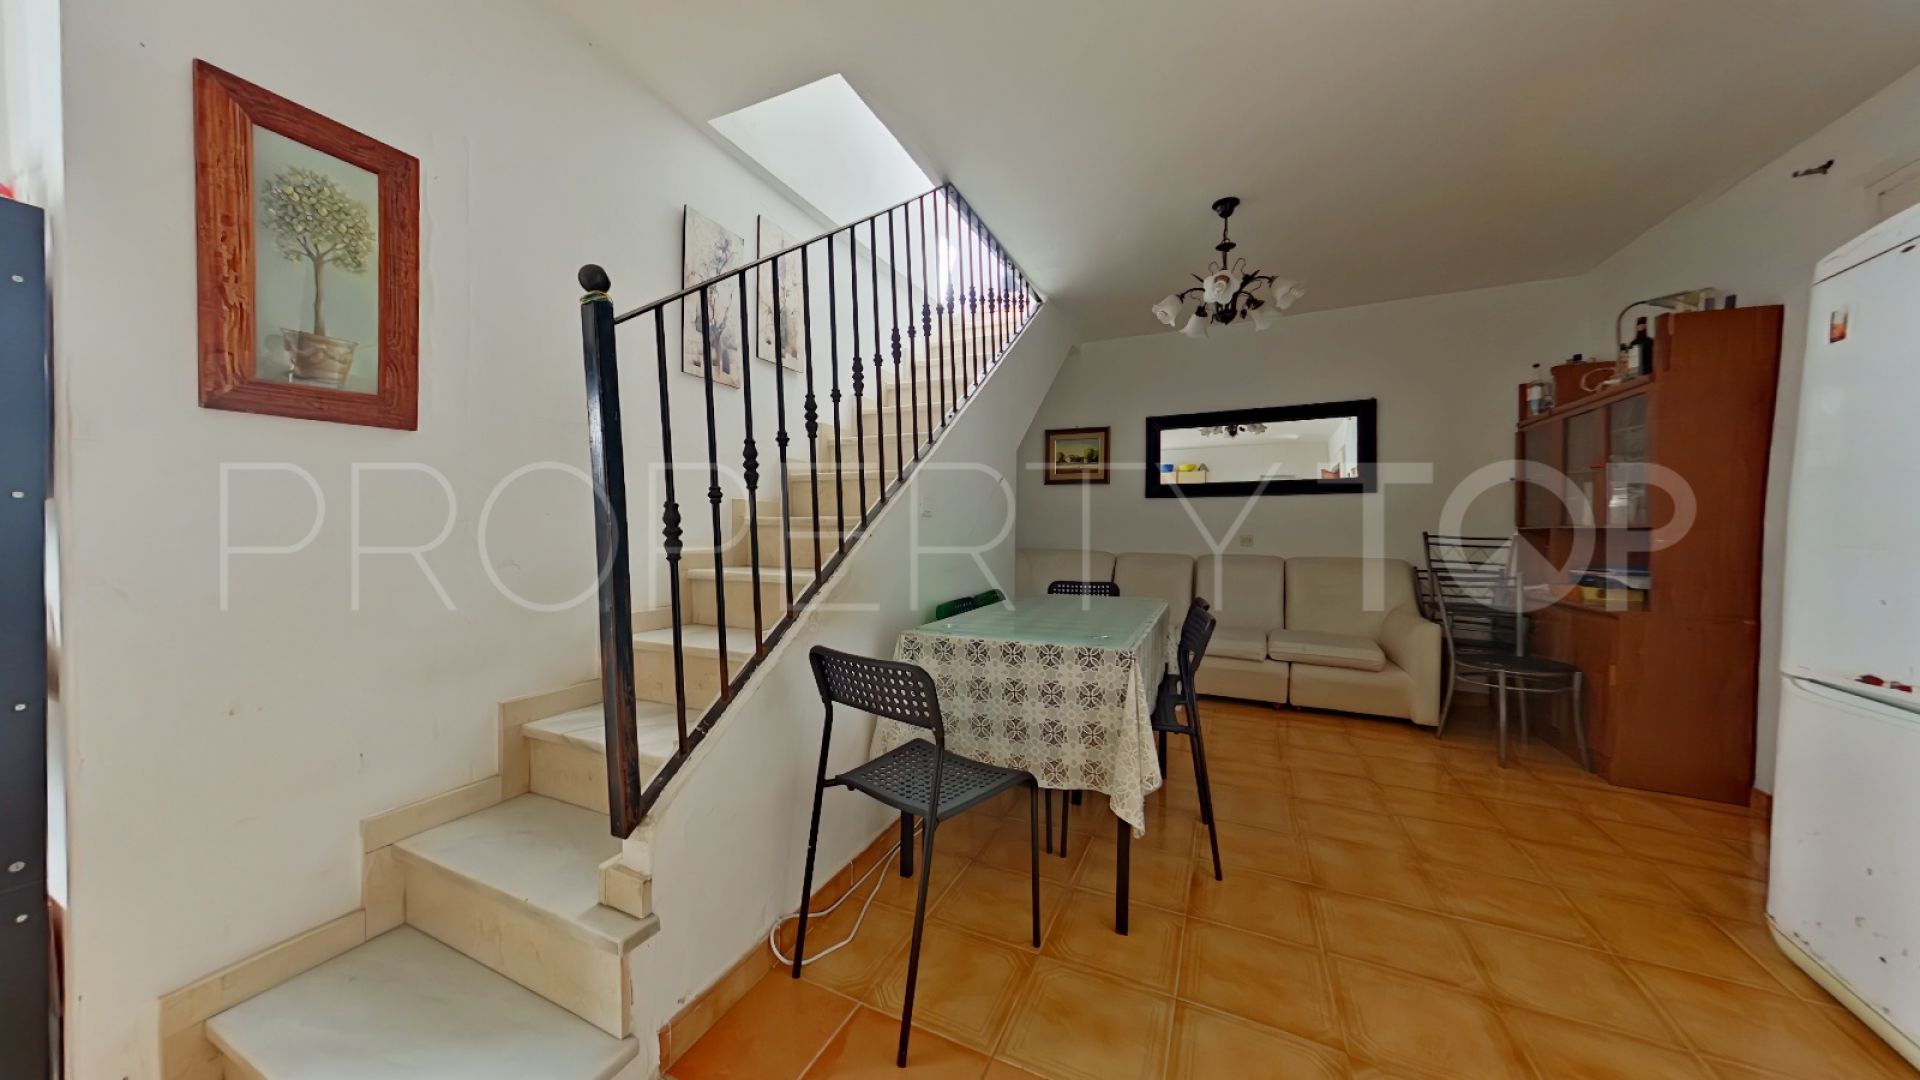 For sale apartment in Estepona Old Town with 2 bedrooms